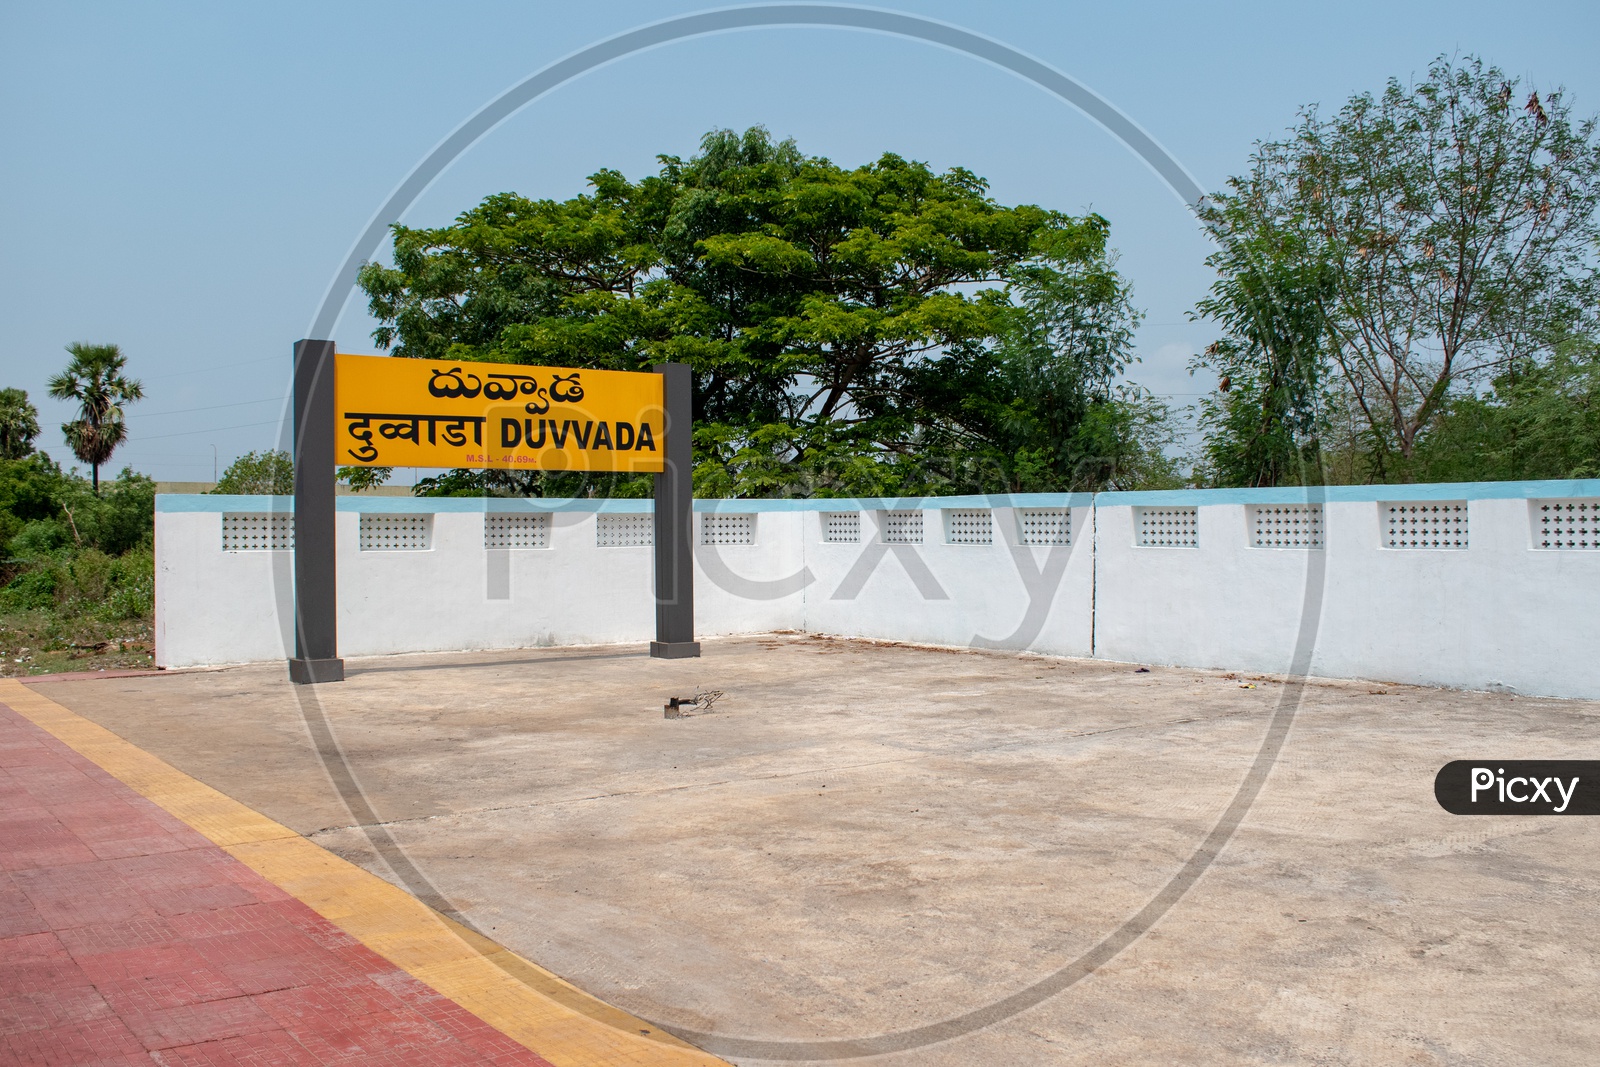 Indian railways sign board showing the name of Duvvada station,Andhra Pradesh.